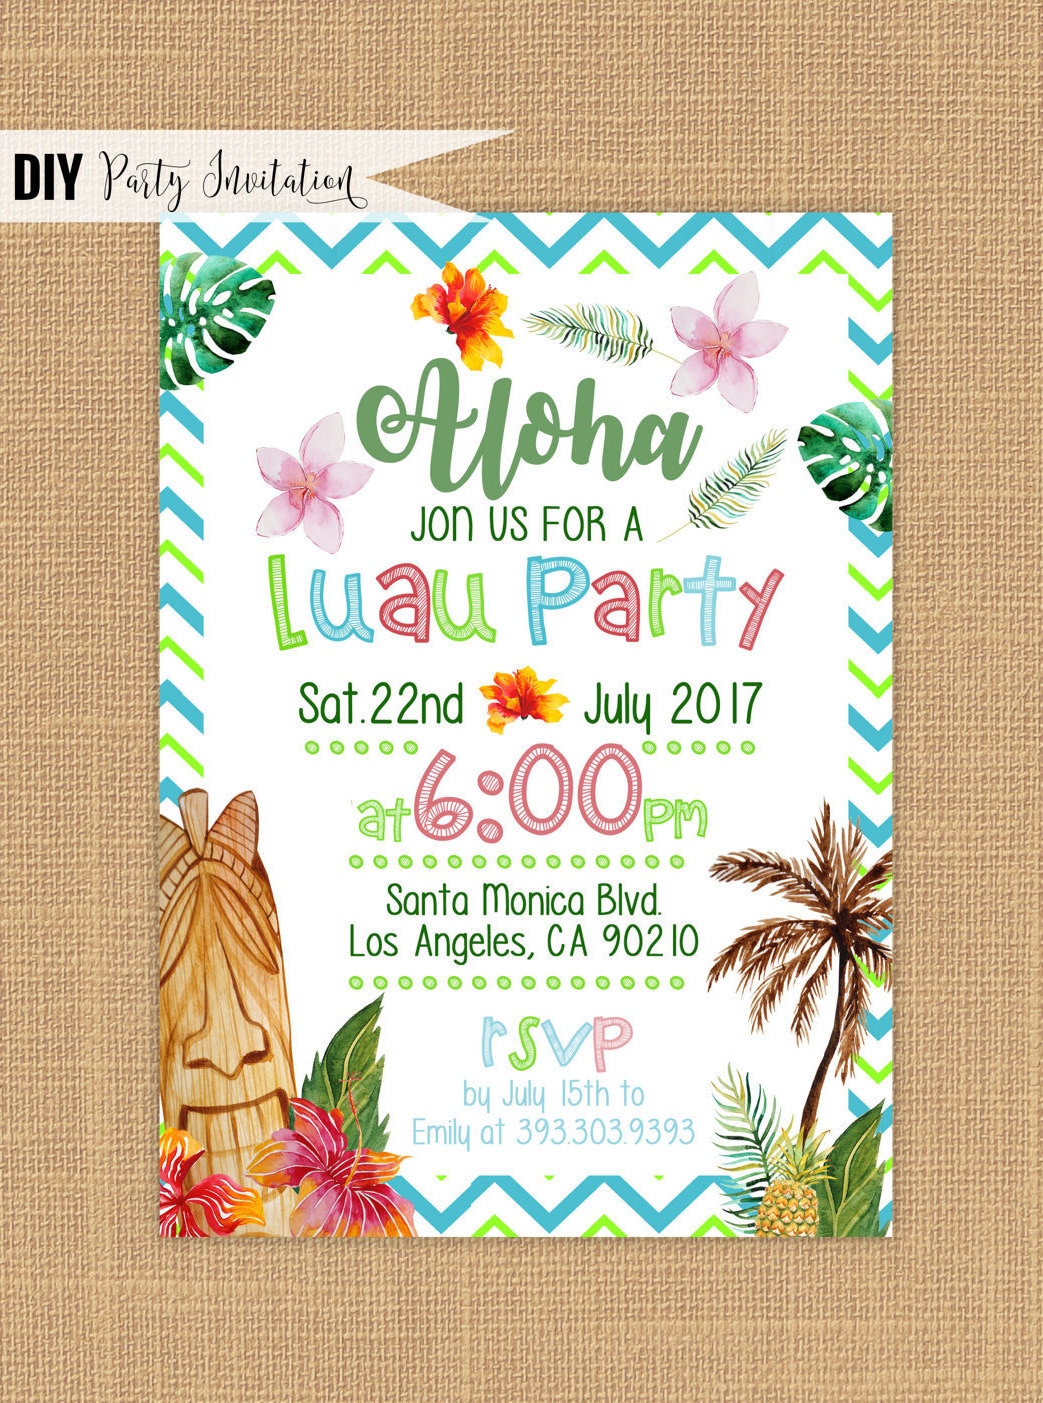 Party Invitations For A Luau Party 2